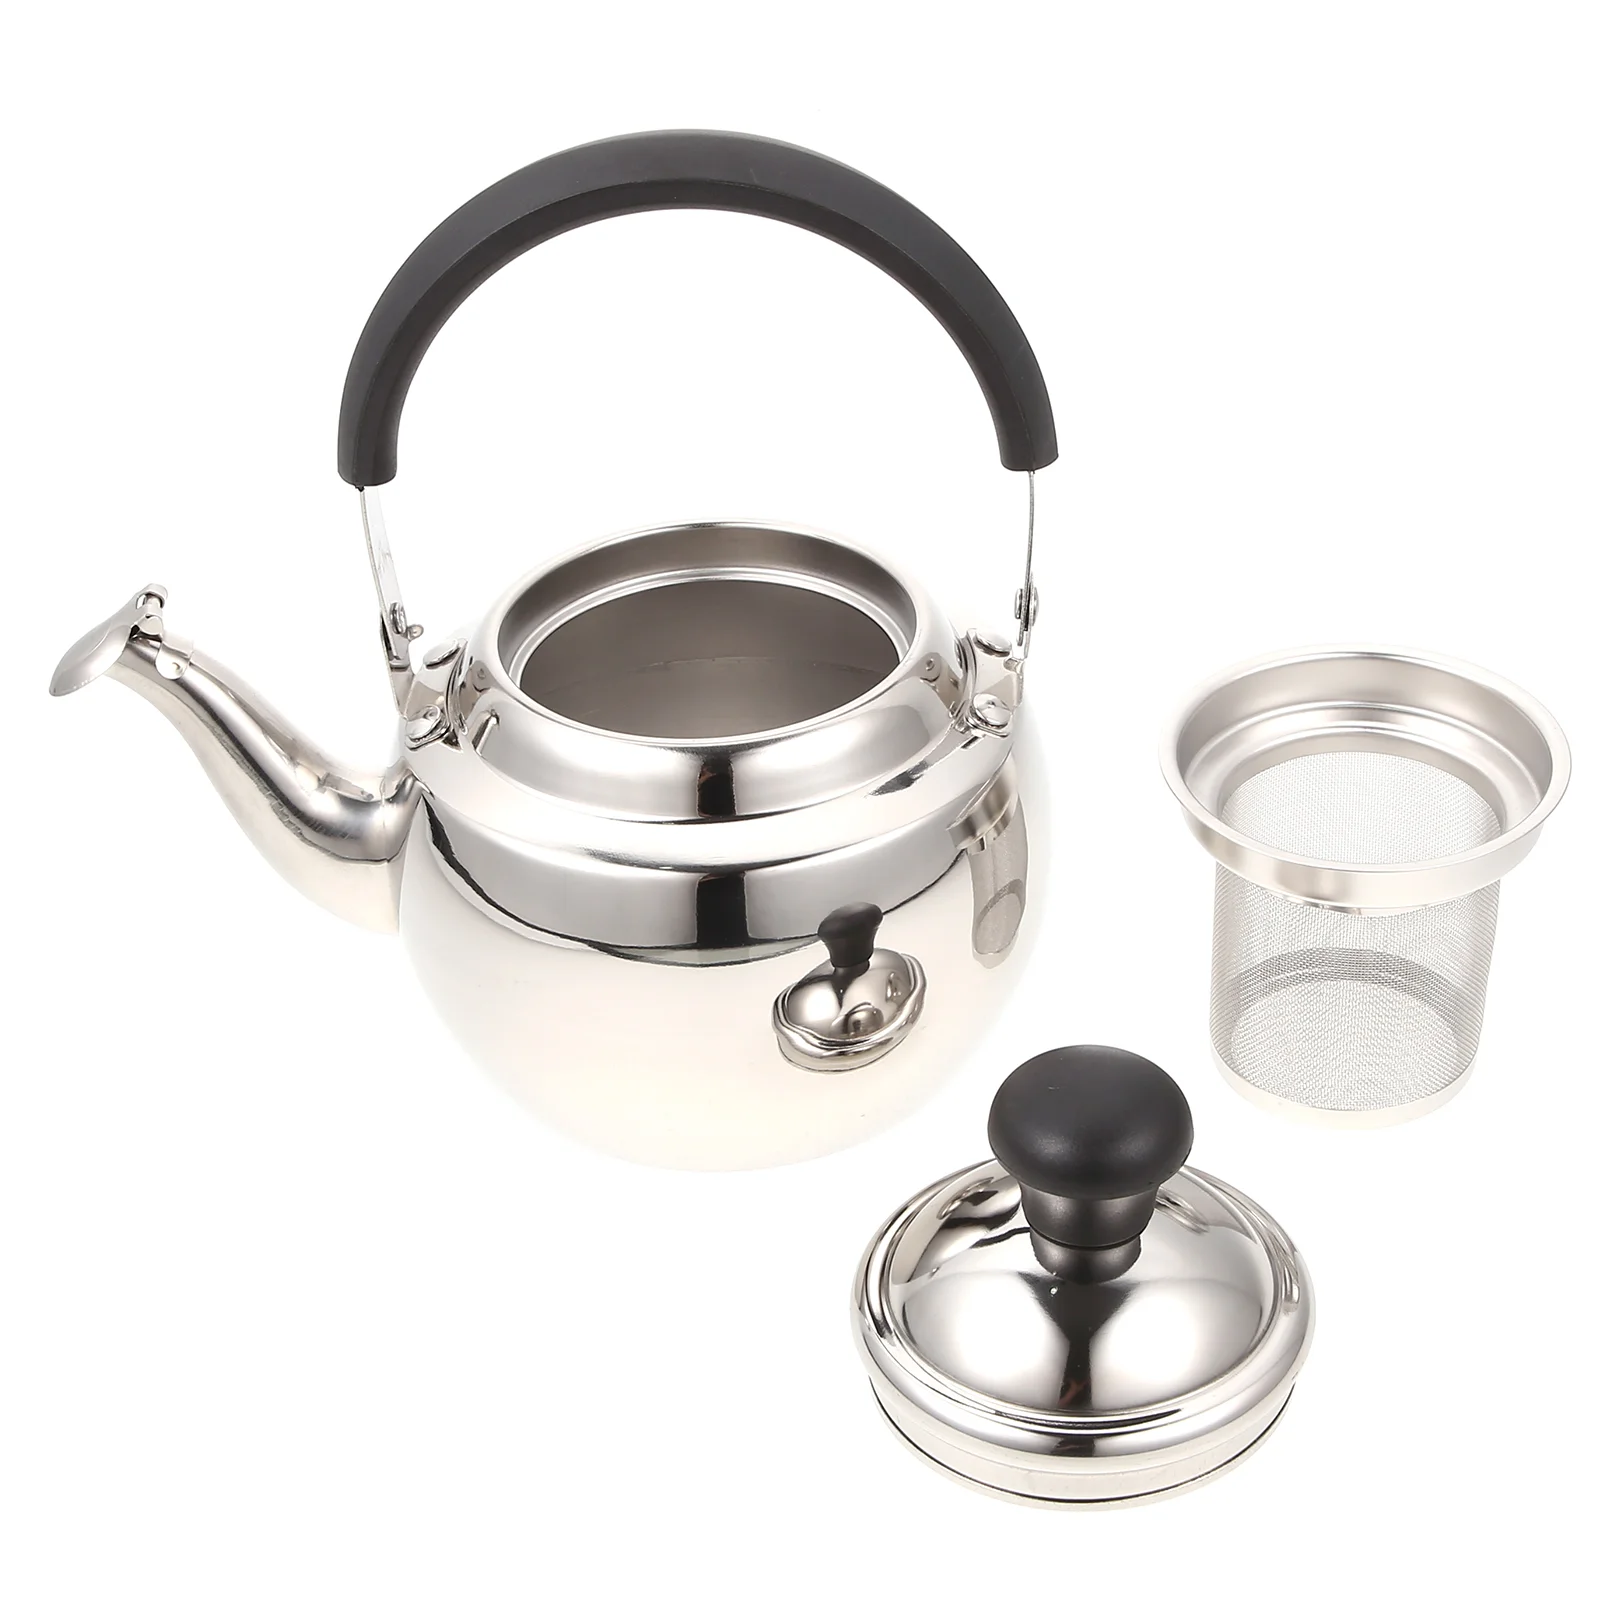 

Kettle Tea Teapot Pot Coffee Stovetop Boiling Whistling Stove Steel Stainless Boiled Water Metal Maker Strainer Gas Espresso